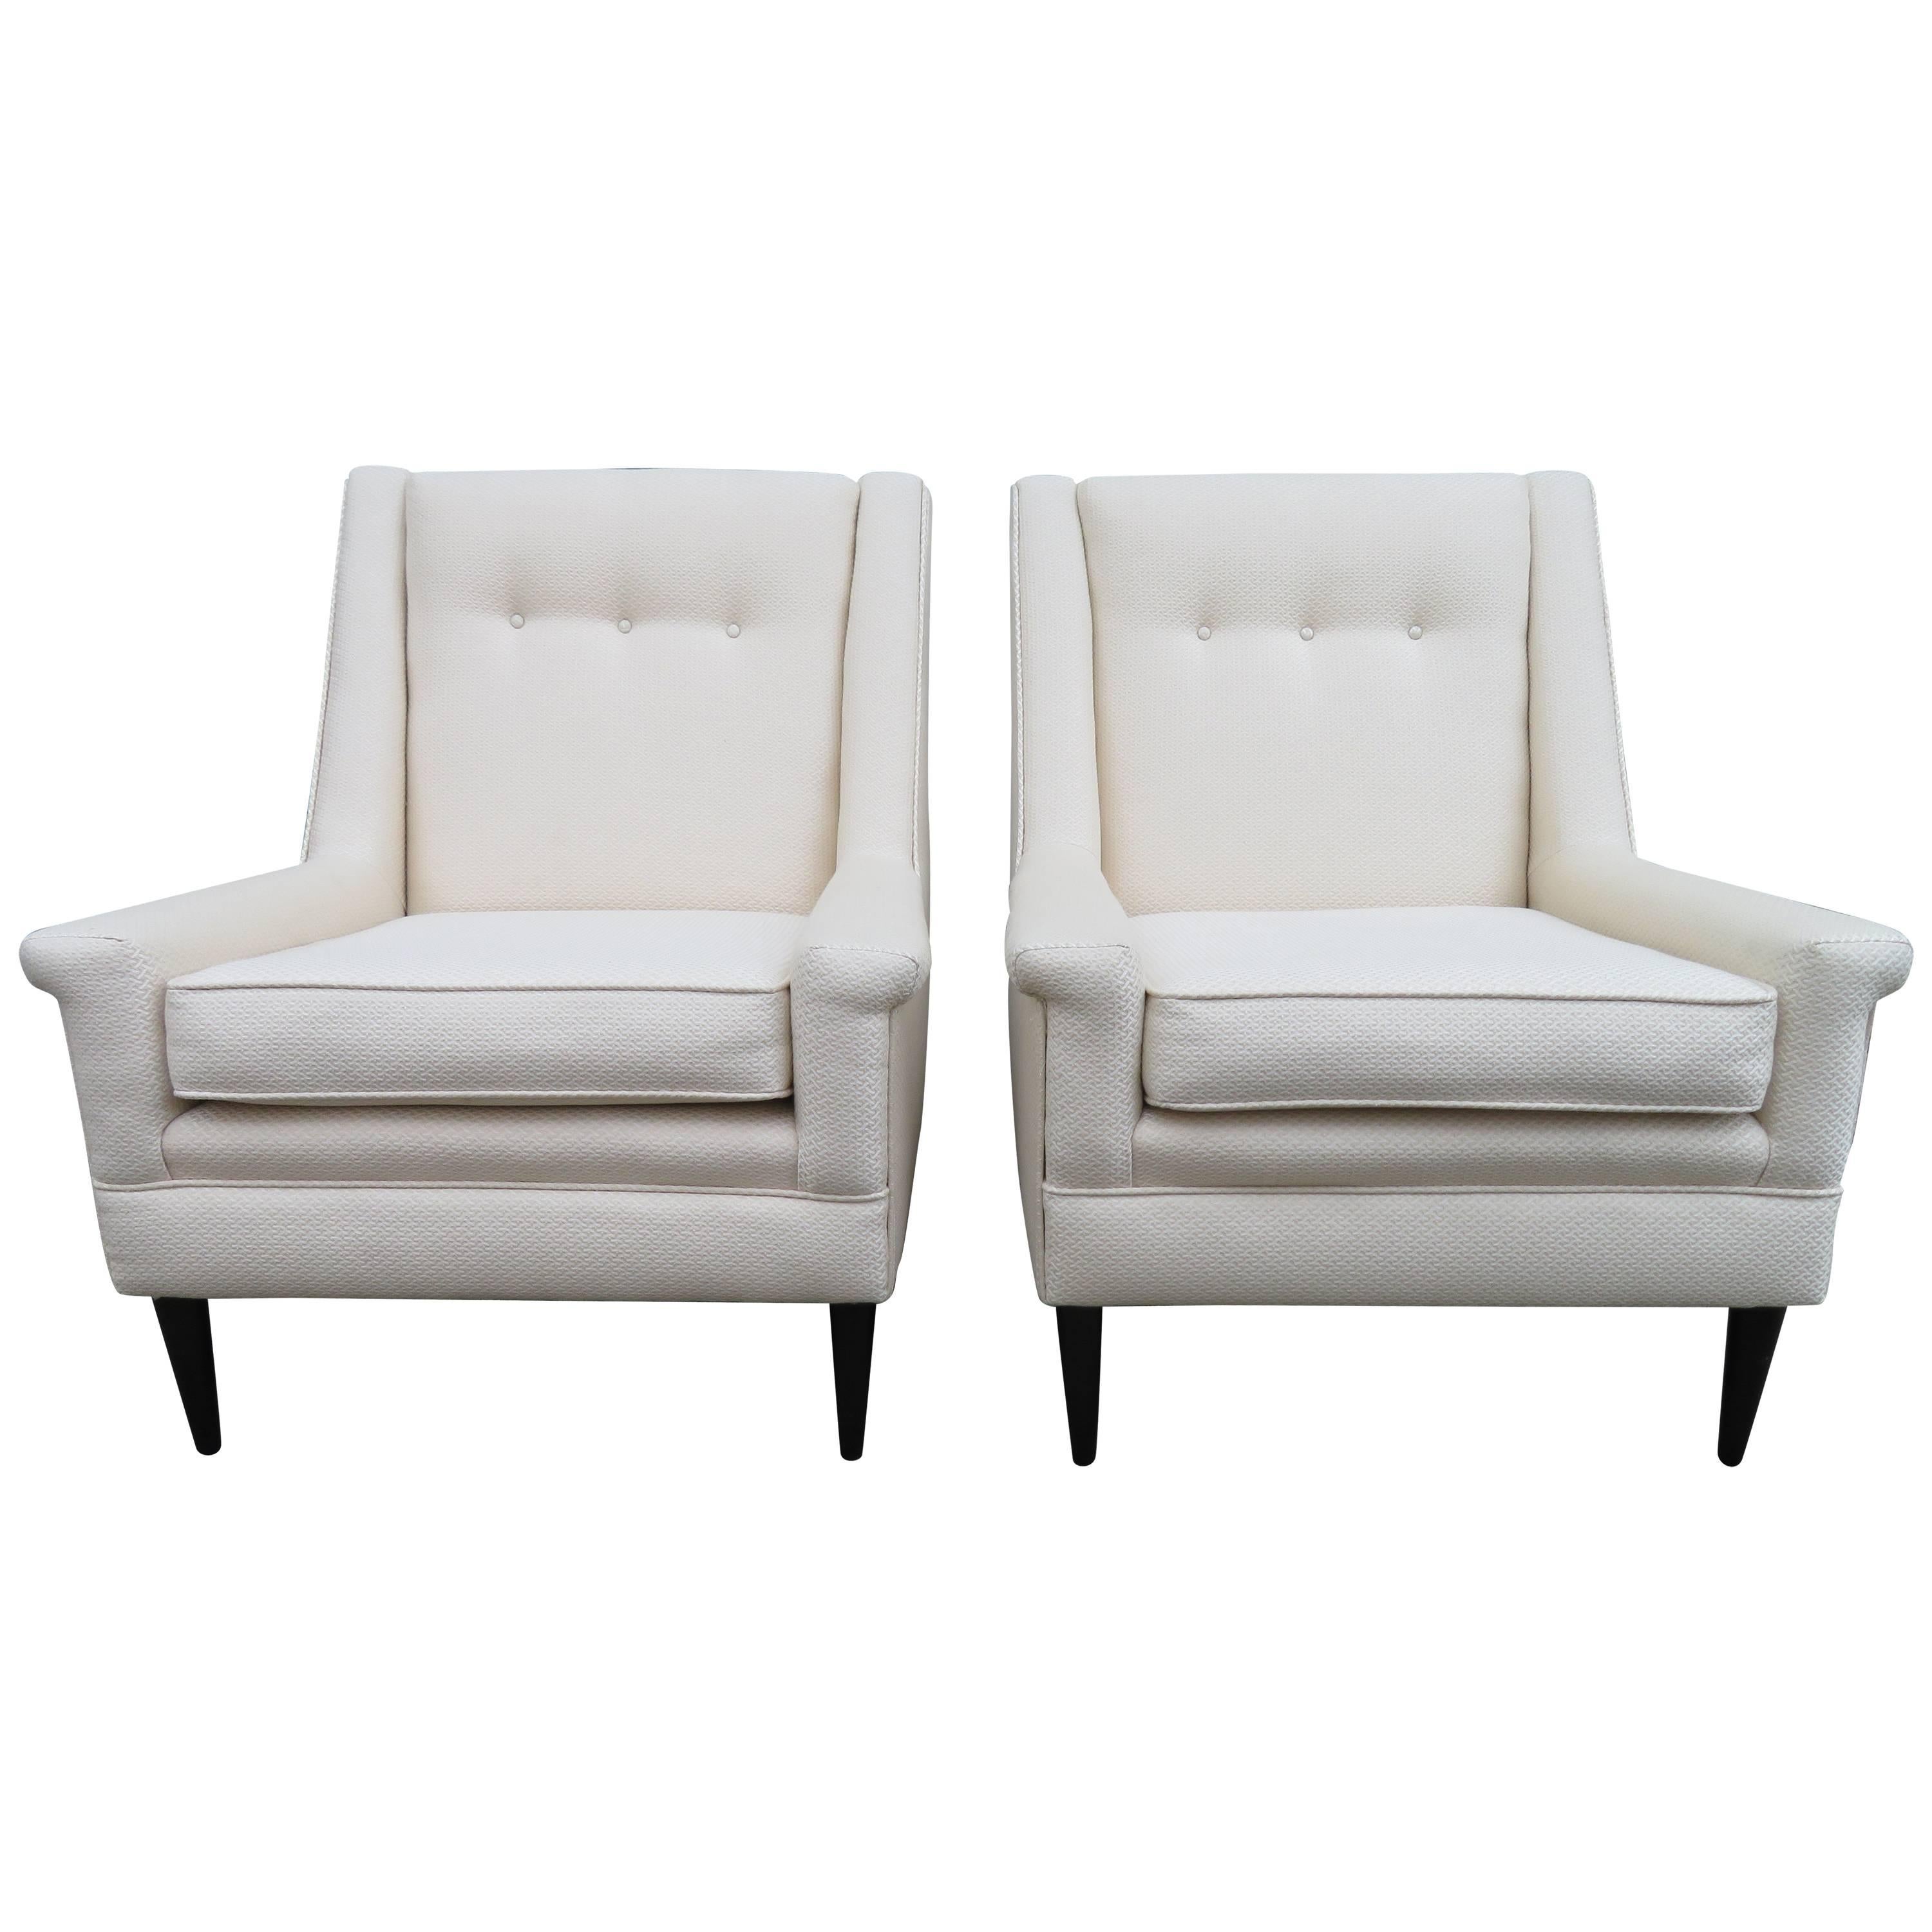 Gorgeous Pair of Harvey Probber Style Lounge Chairs, Mid-Century Modern